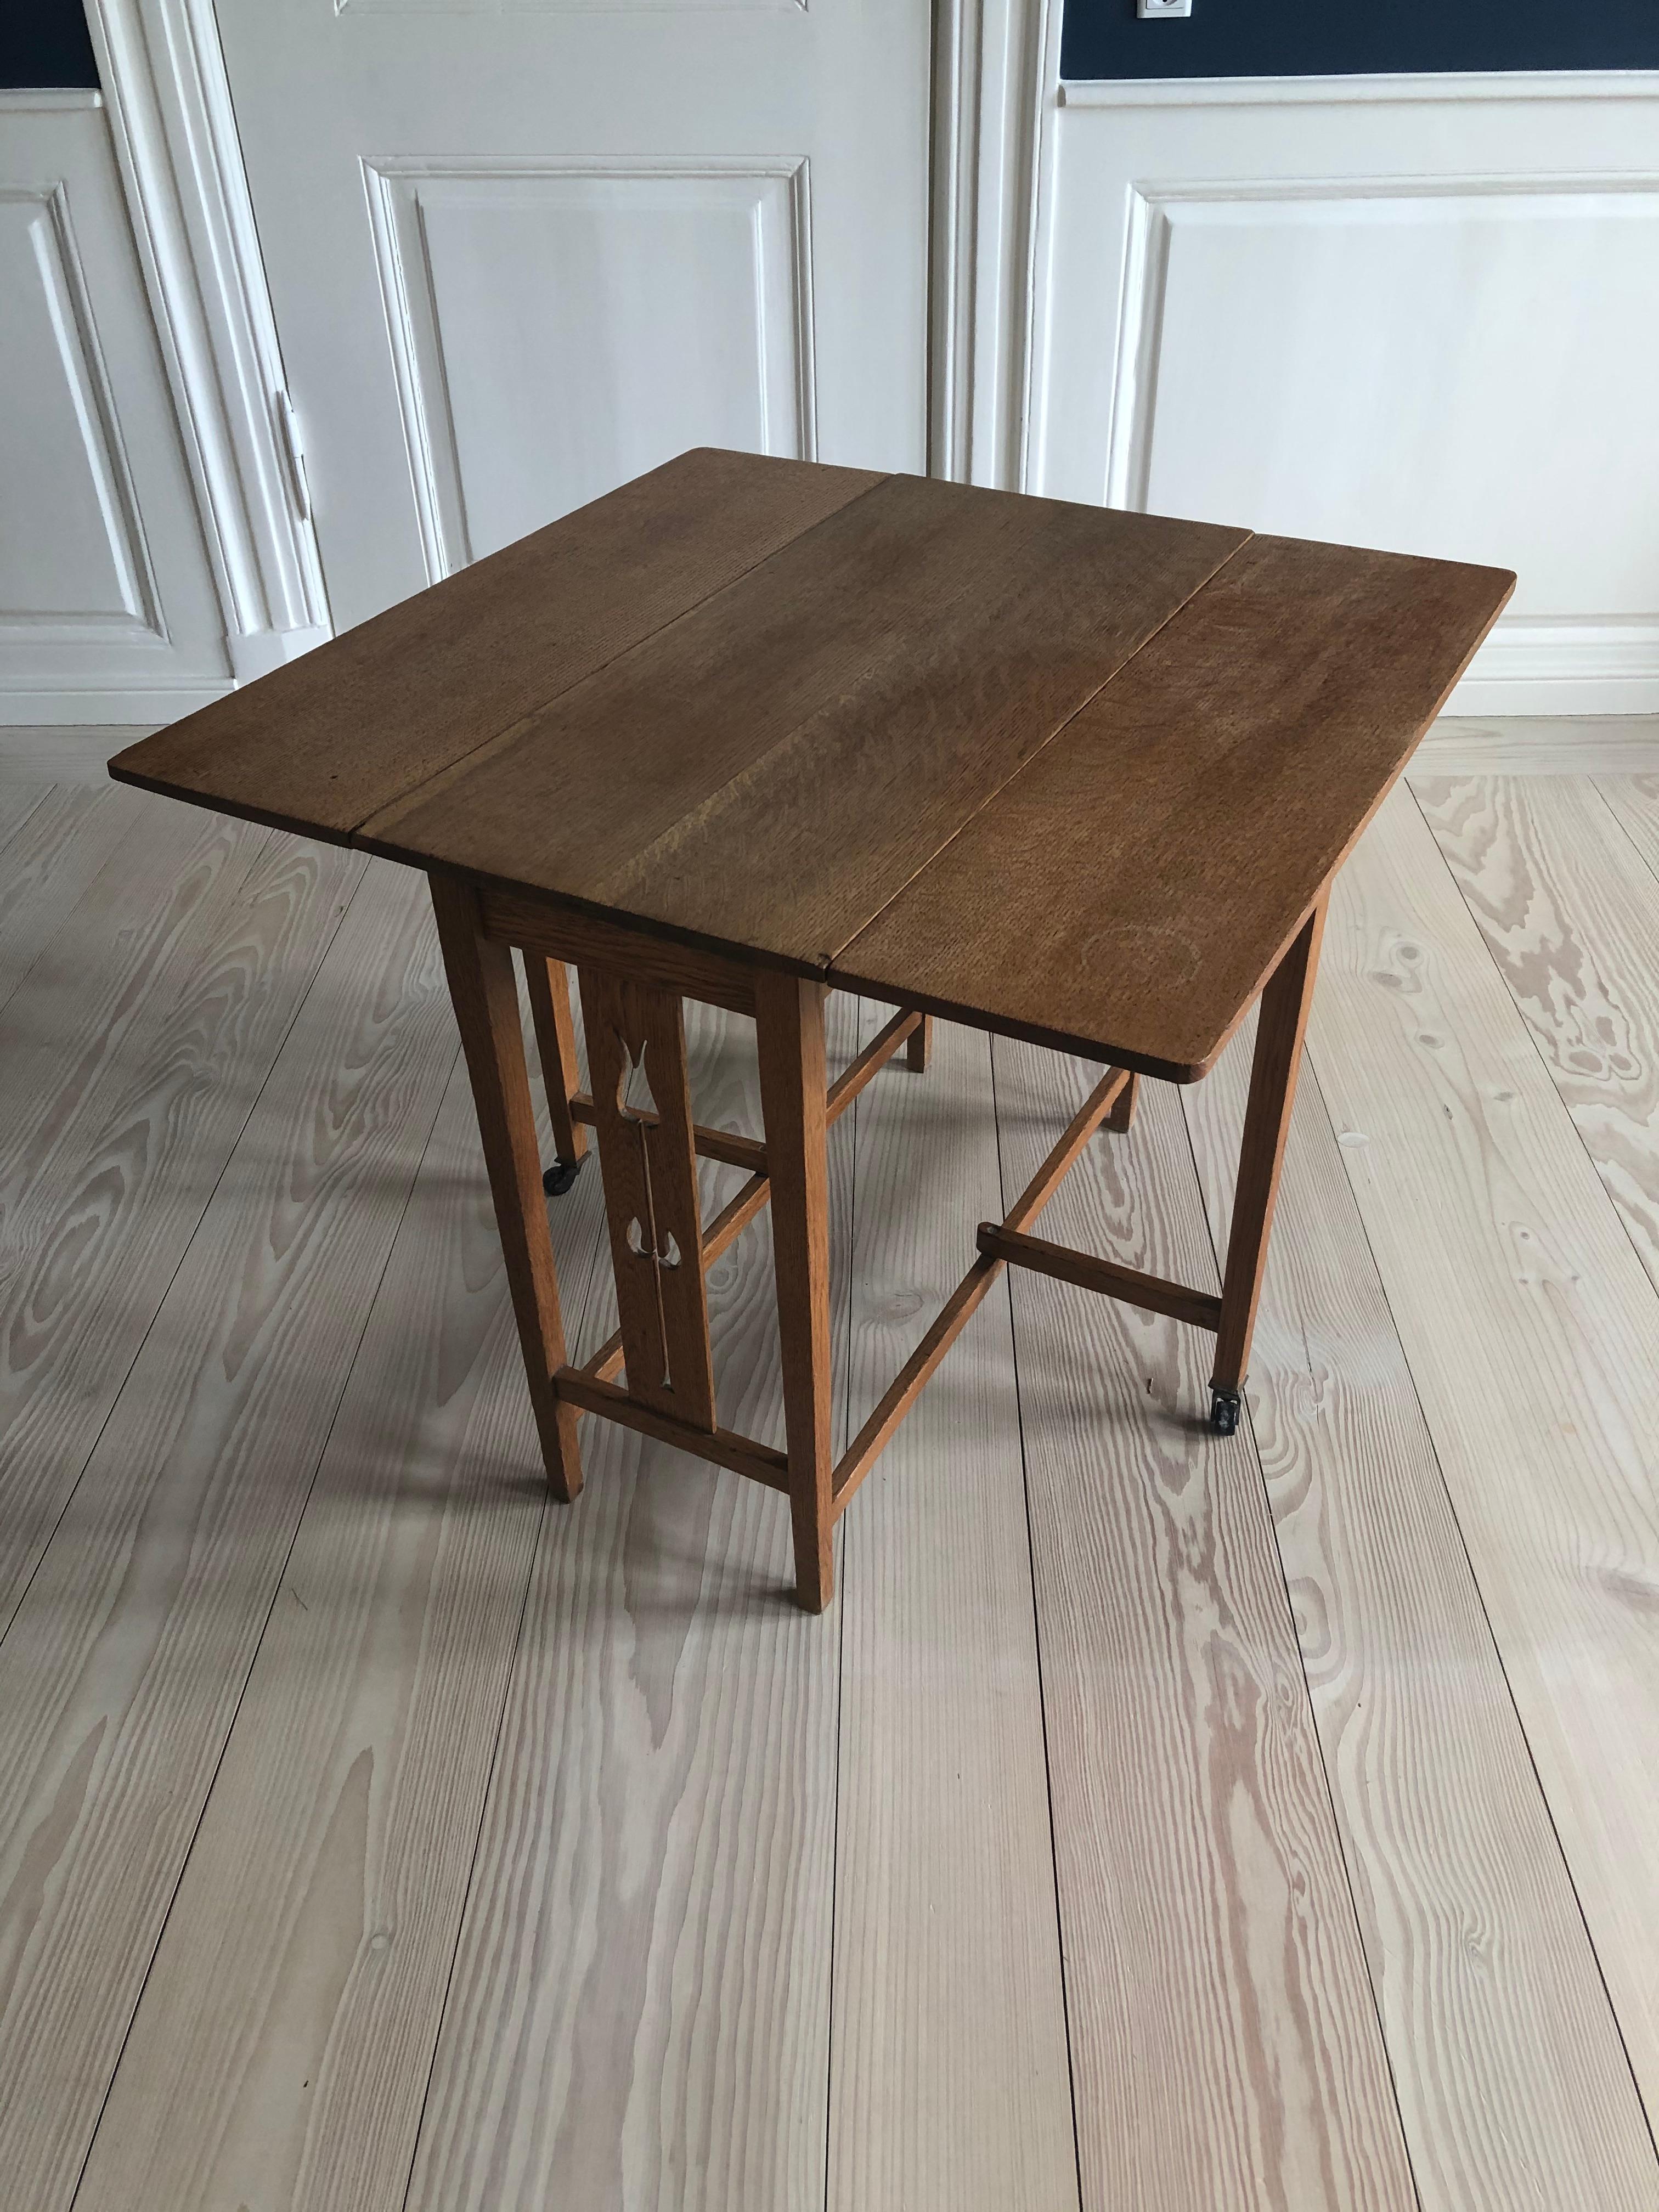 Vintage Arts & Crafts Drop-Leaf Table in Solid Oak, England, Early 20th Century 2